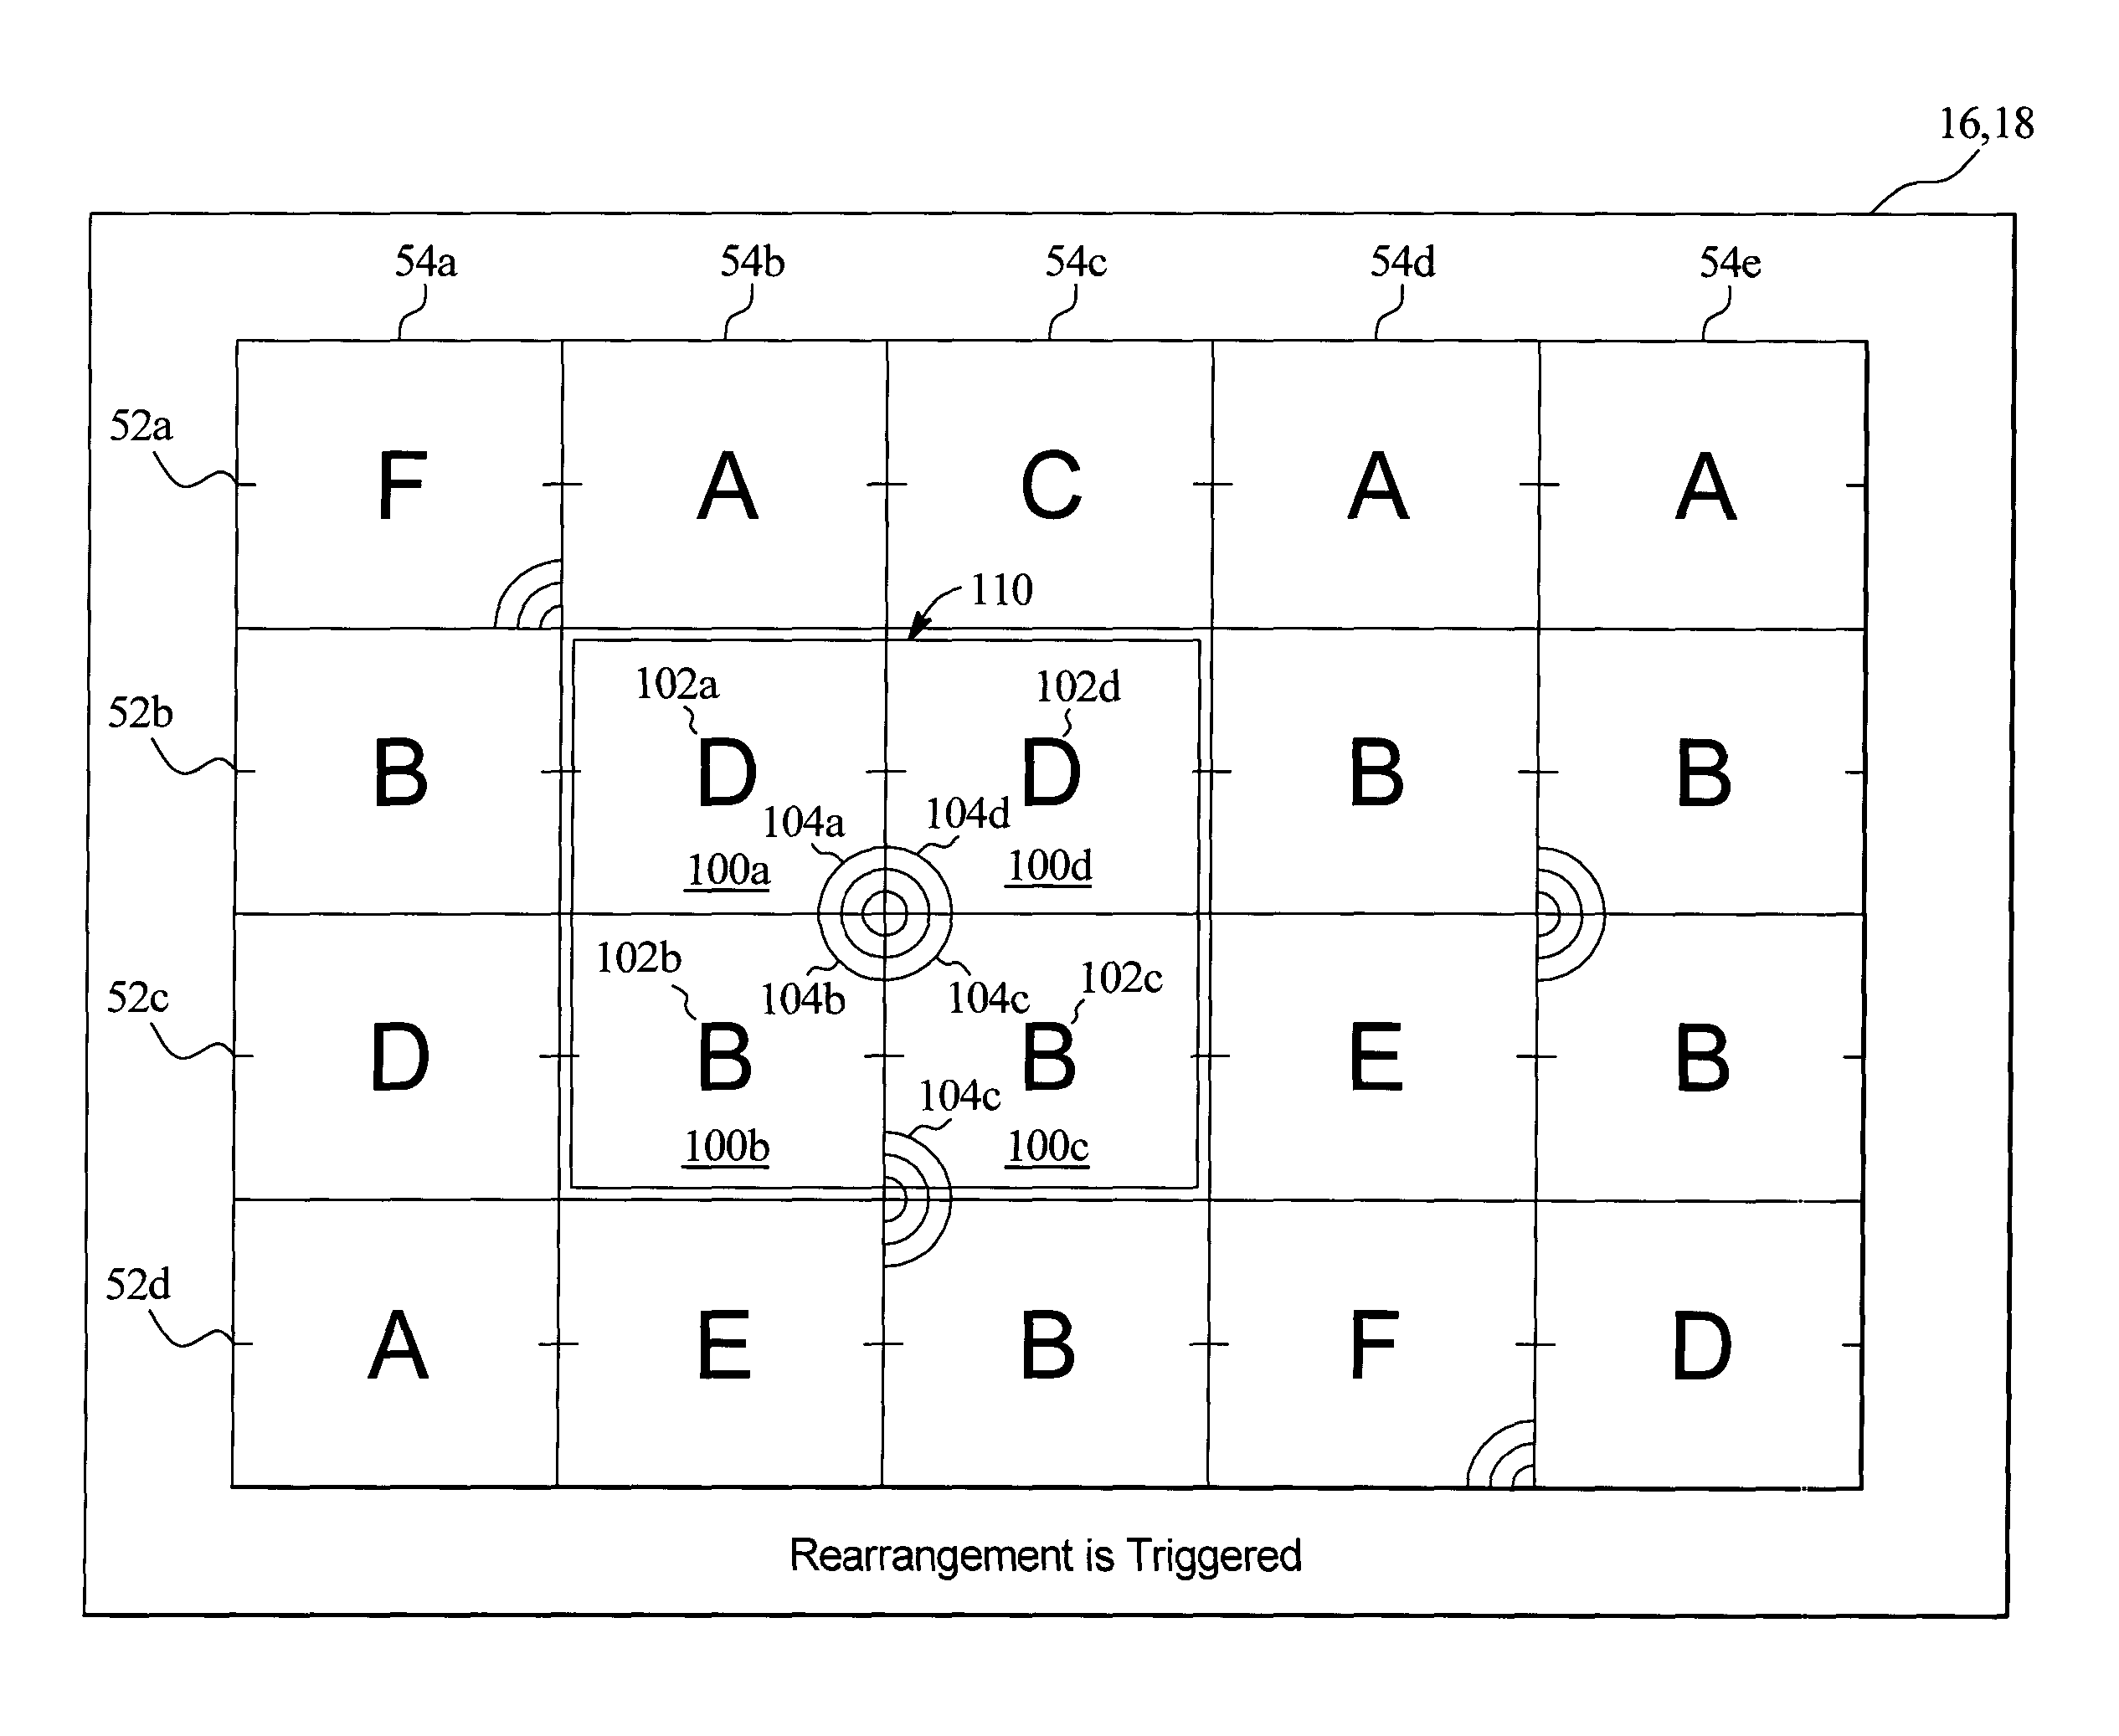 Gaming device having a multiple symbol swapping game